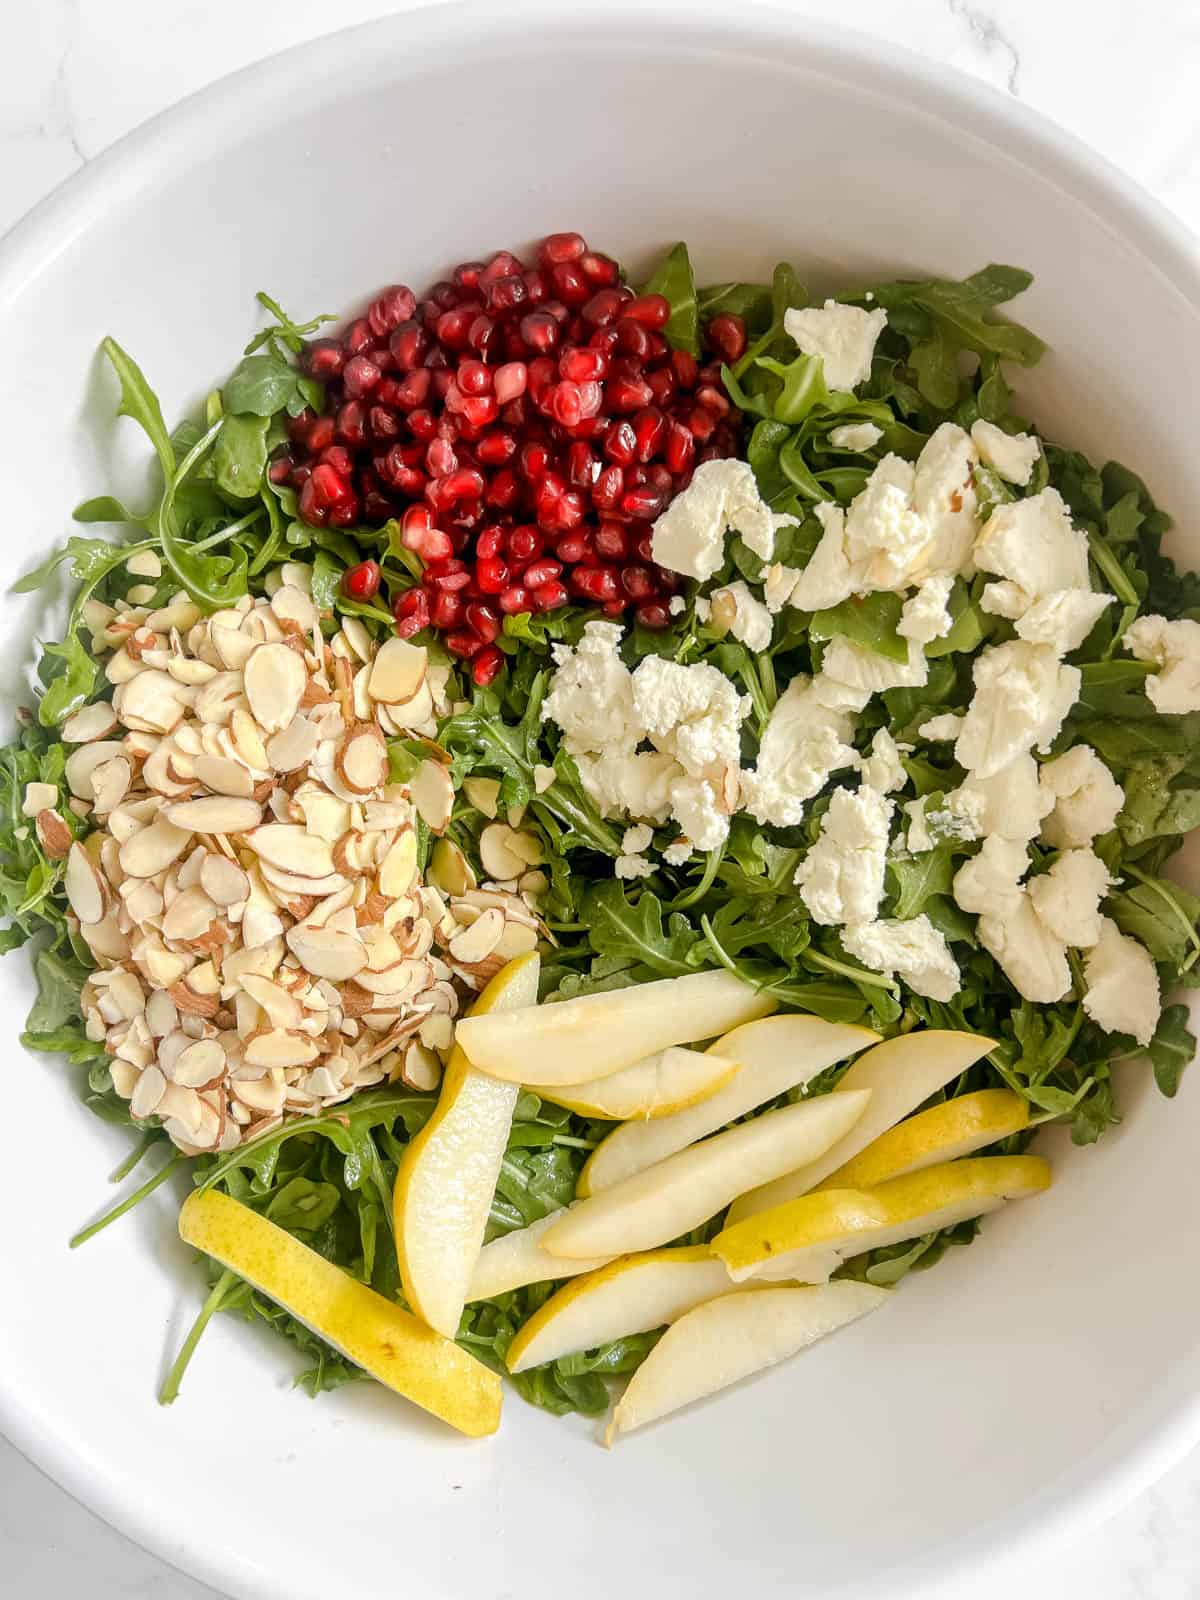 Toppings added to the pear pomegranate salad.